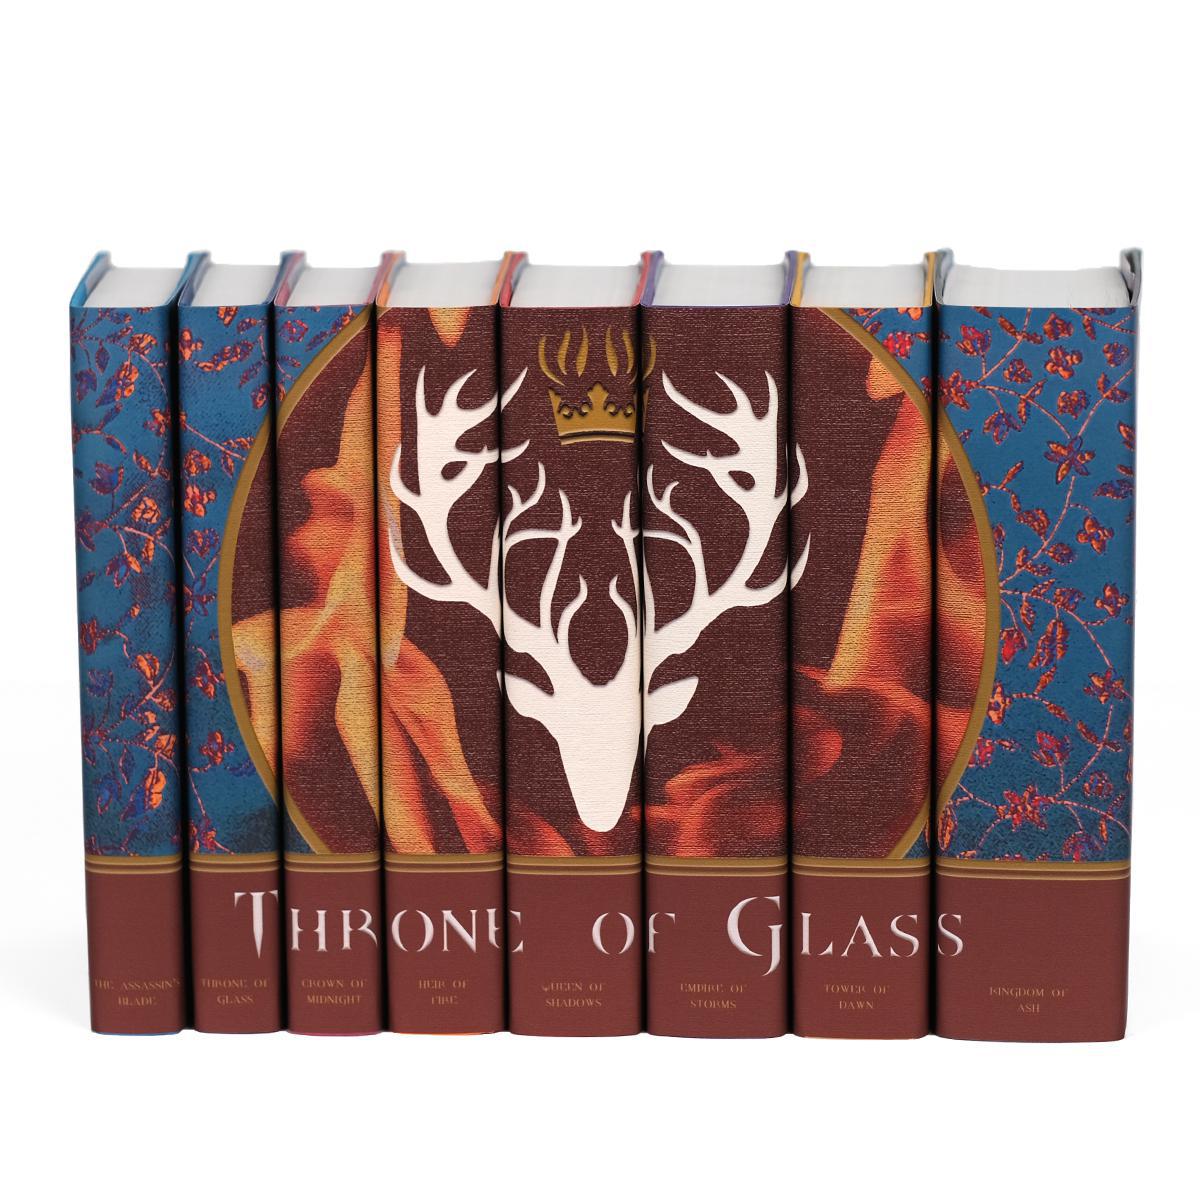 Customized Throne of Glass Set Jackets Only